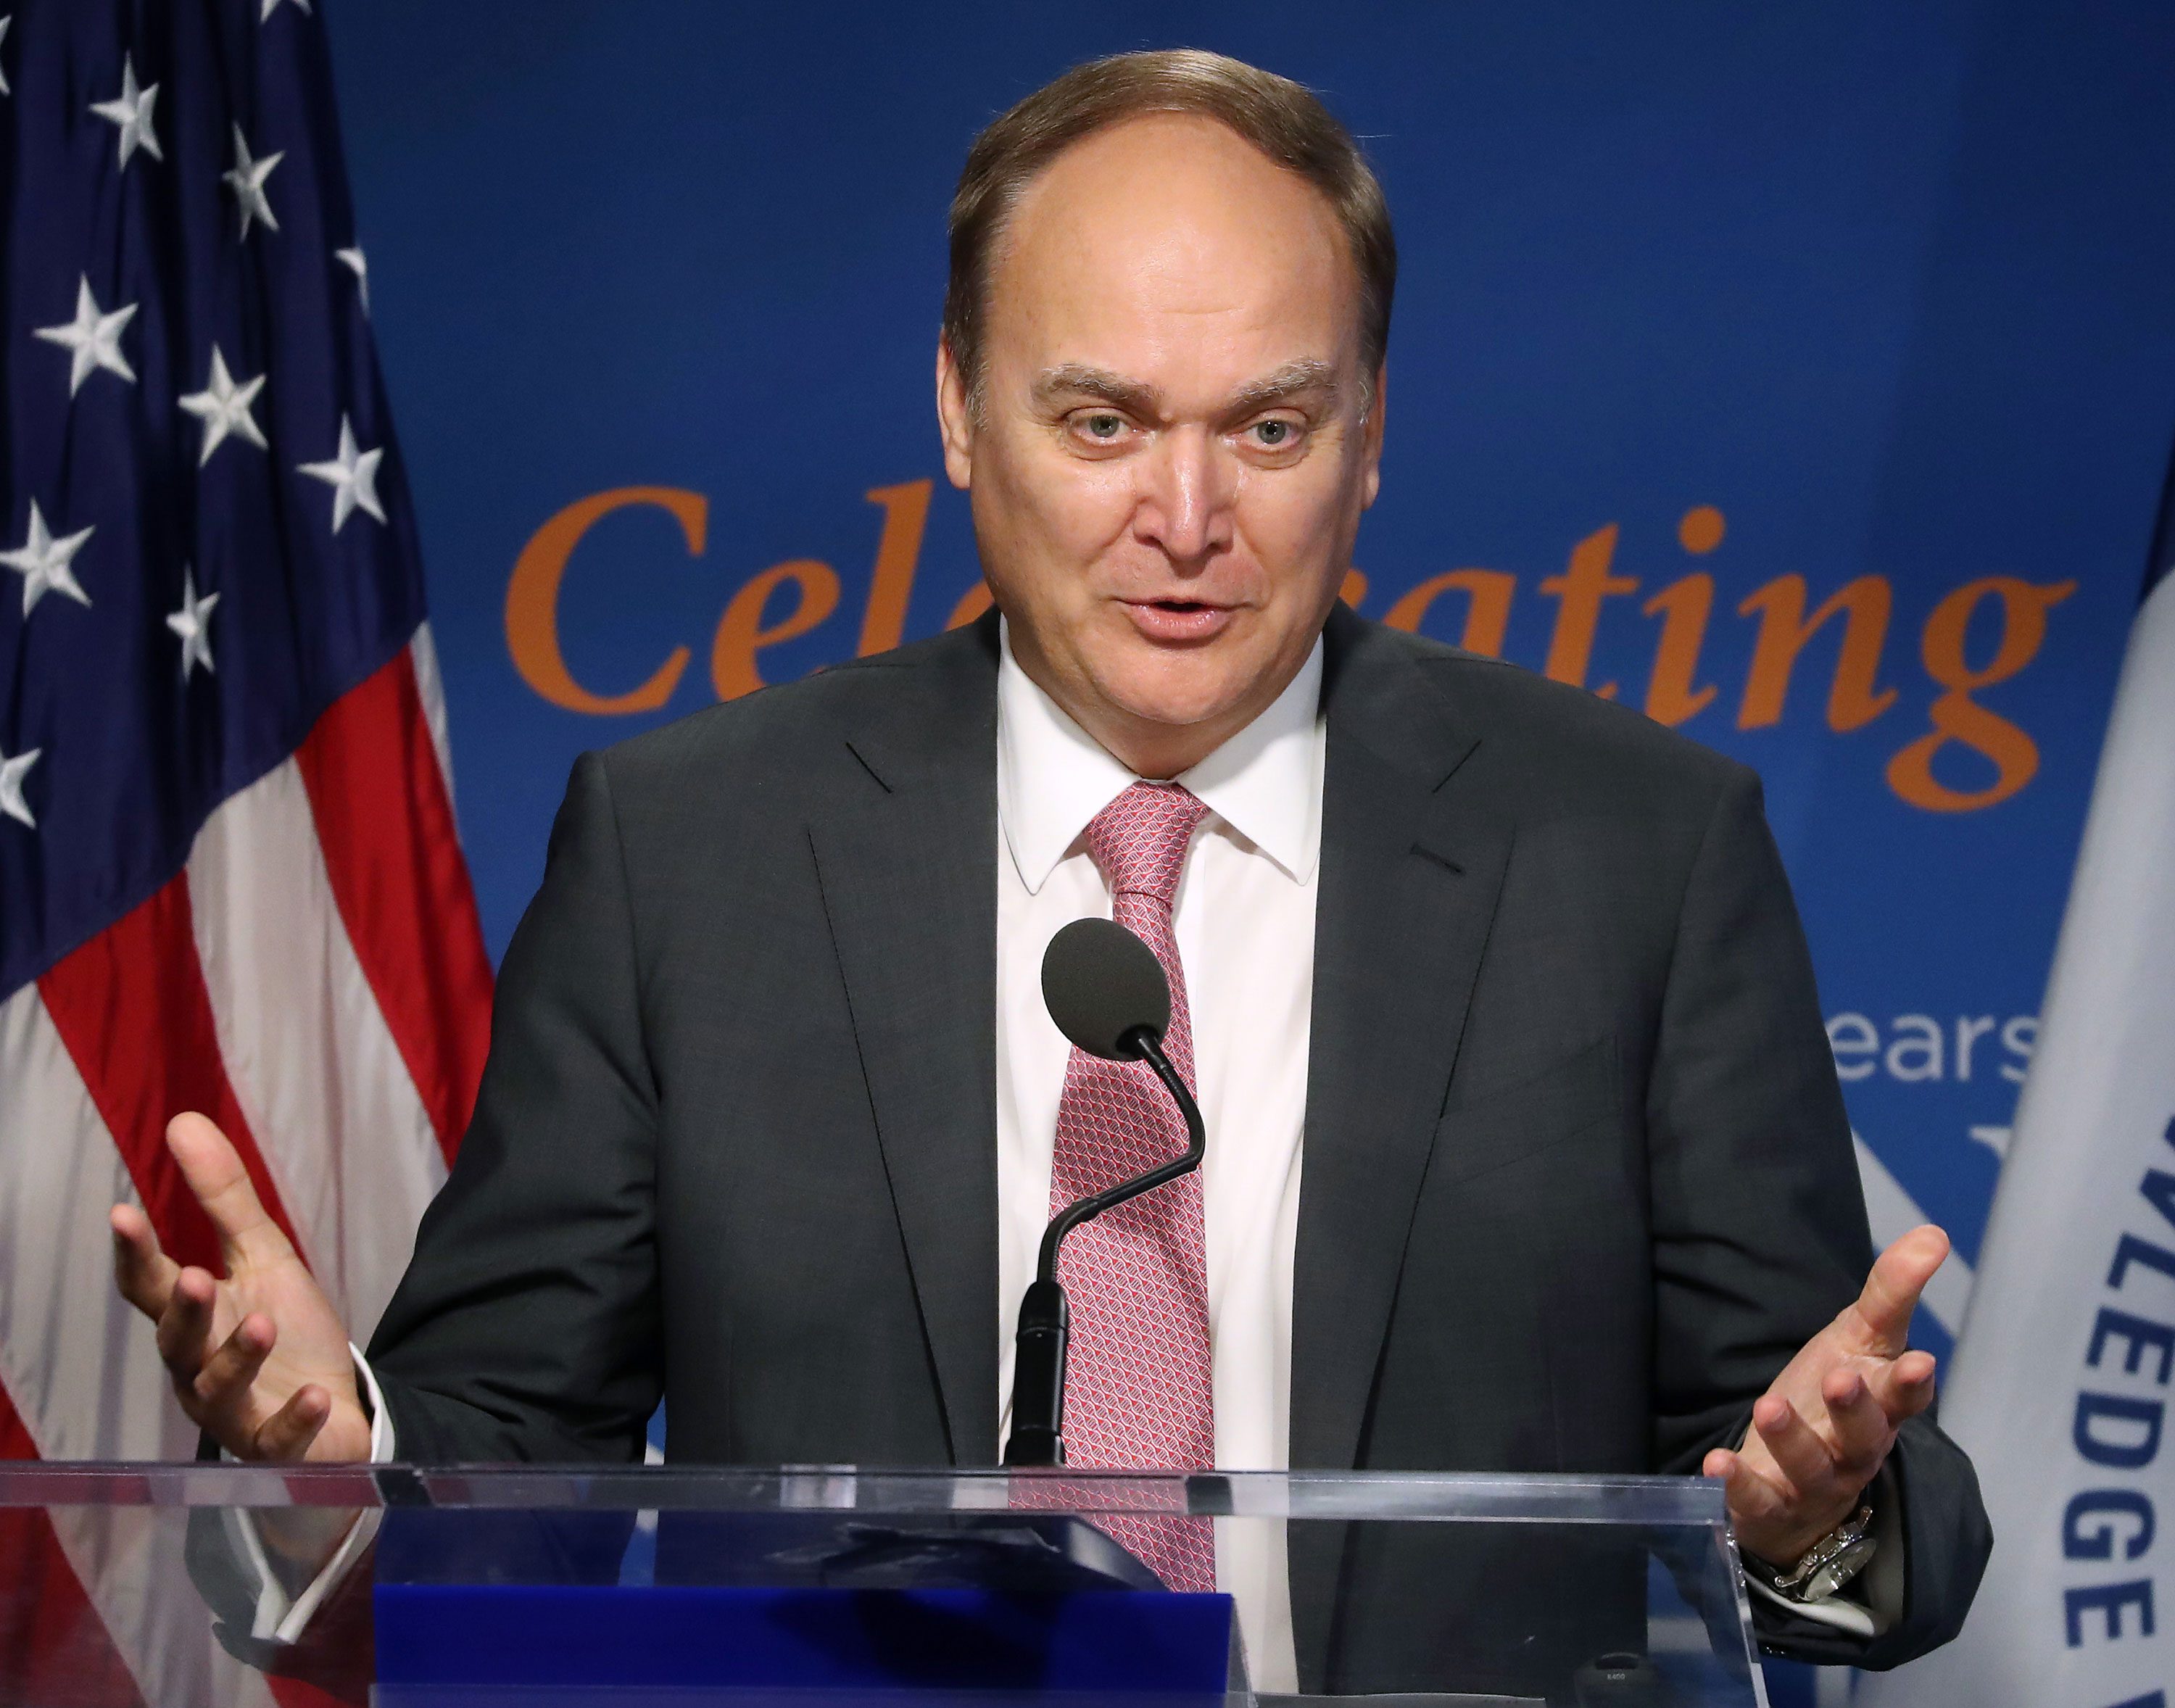 Russian Ambassador to the US Anatoly Antonov speaks at an event in Washington, DC, in 2019.